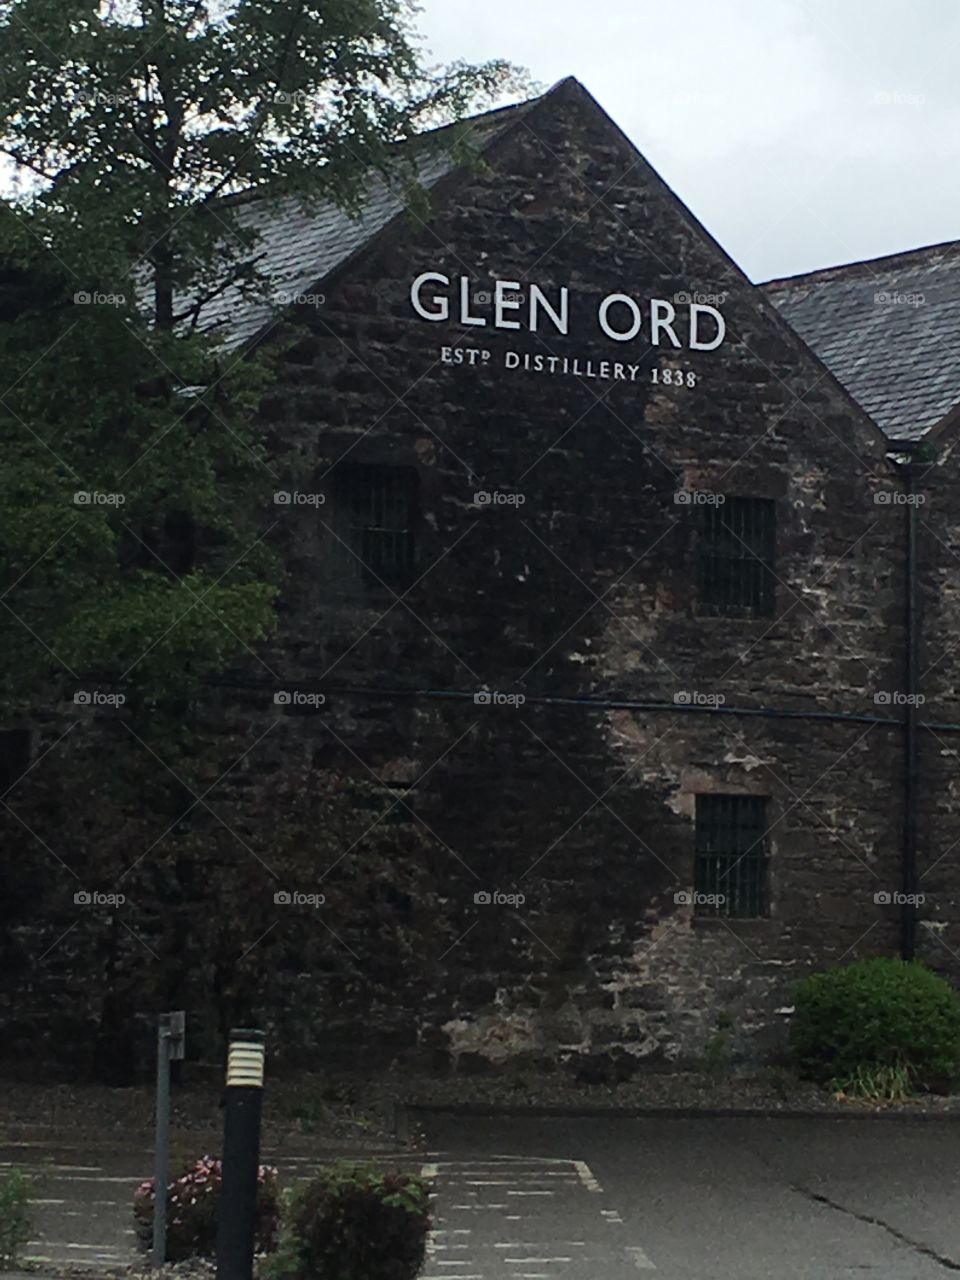 Great whisky distillery in Scotland 